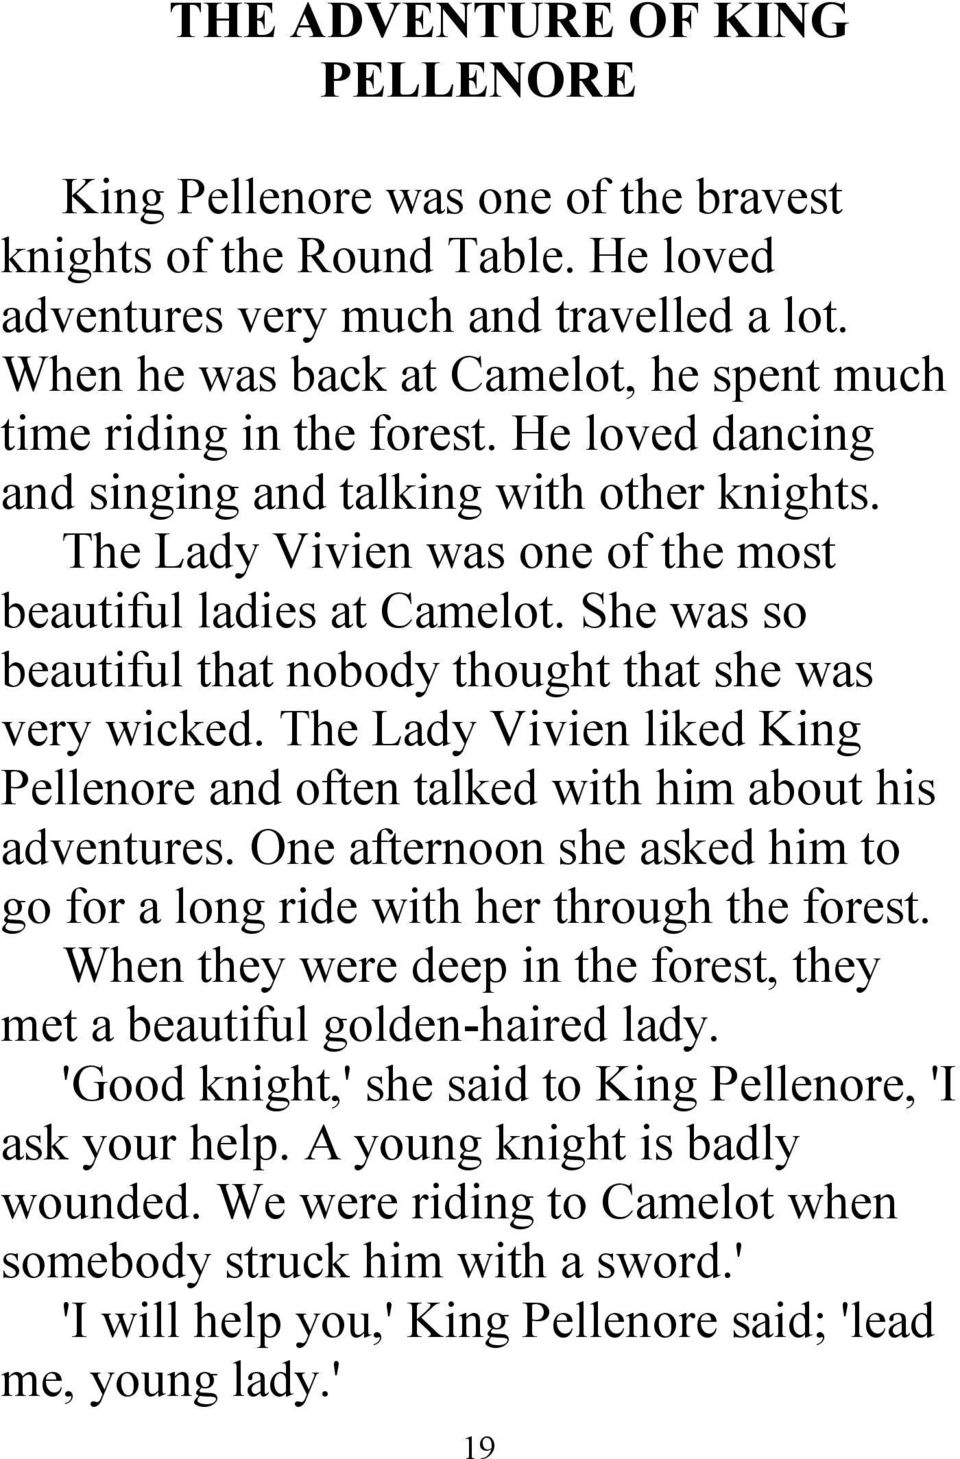 She was so beautiful that nobody thought that she was very wicked. The Lady Vivien liked King Pellenore and often talked with him about his adventures.